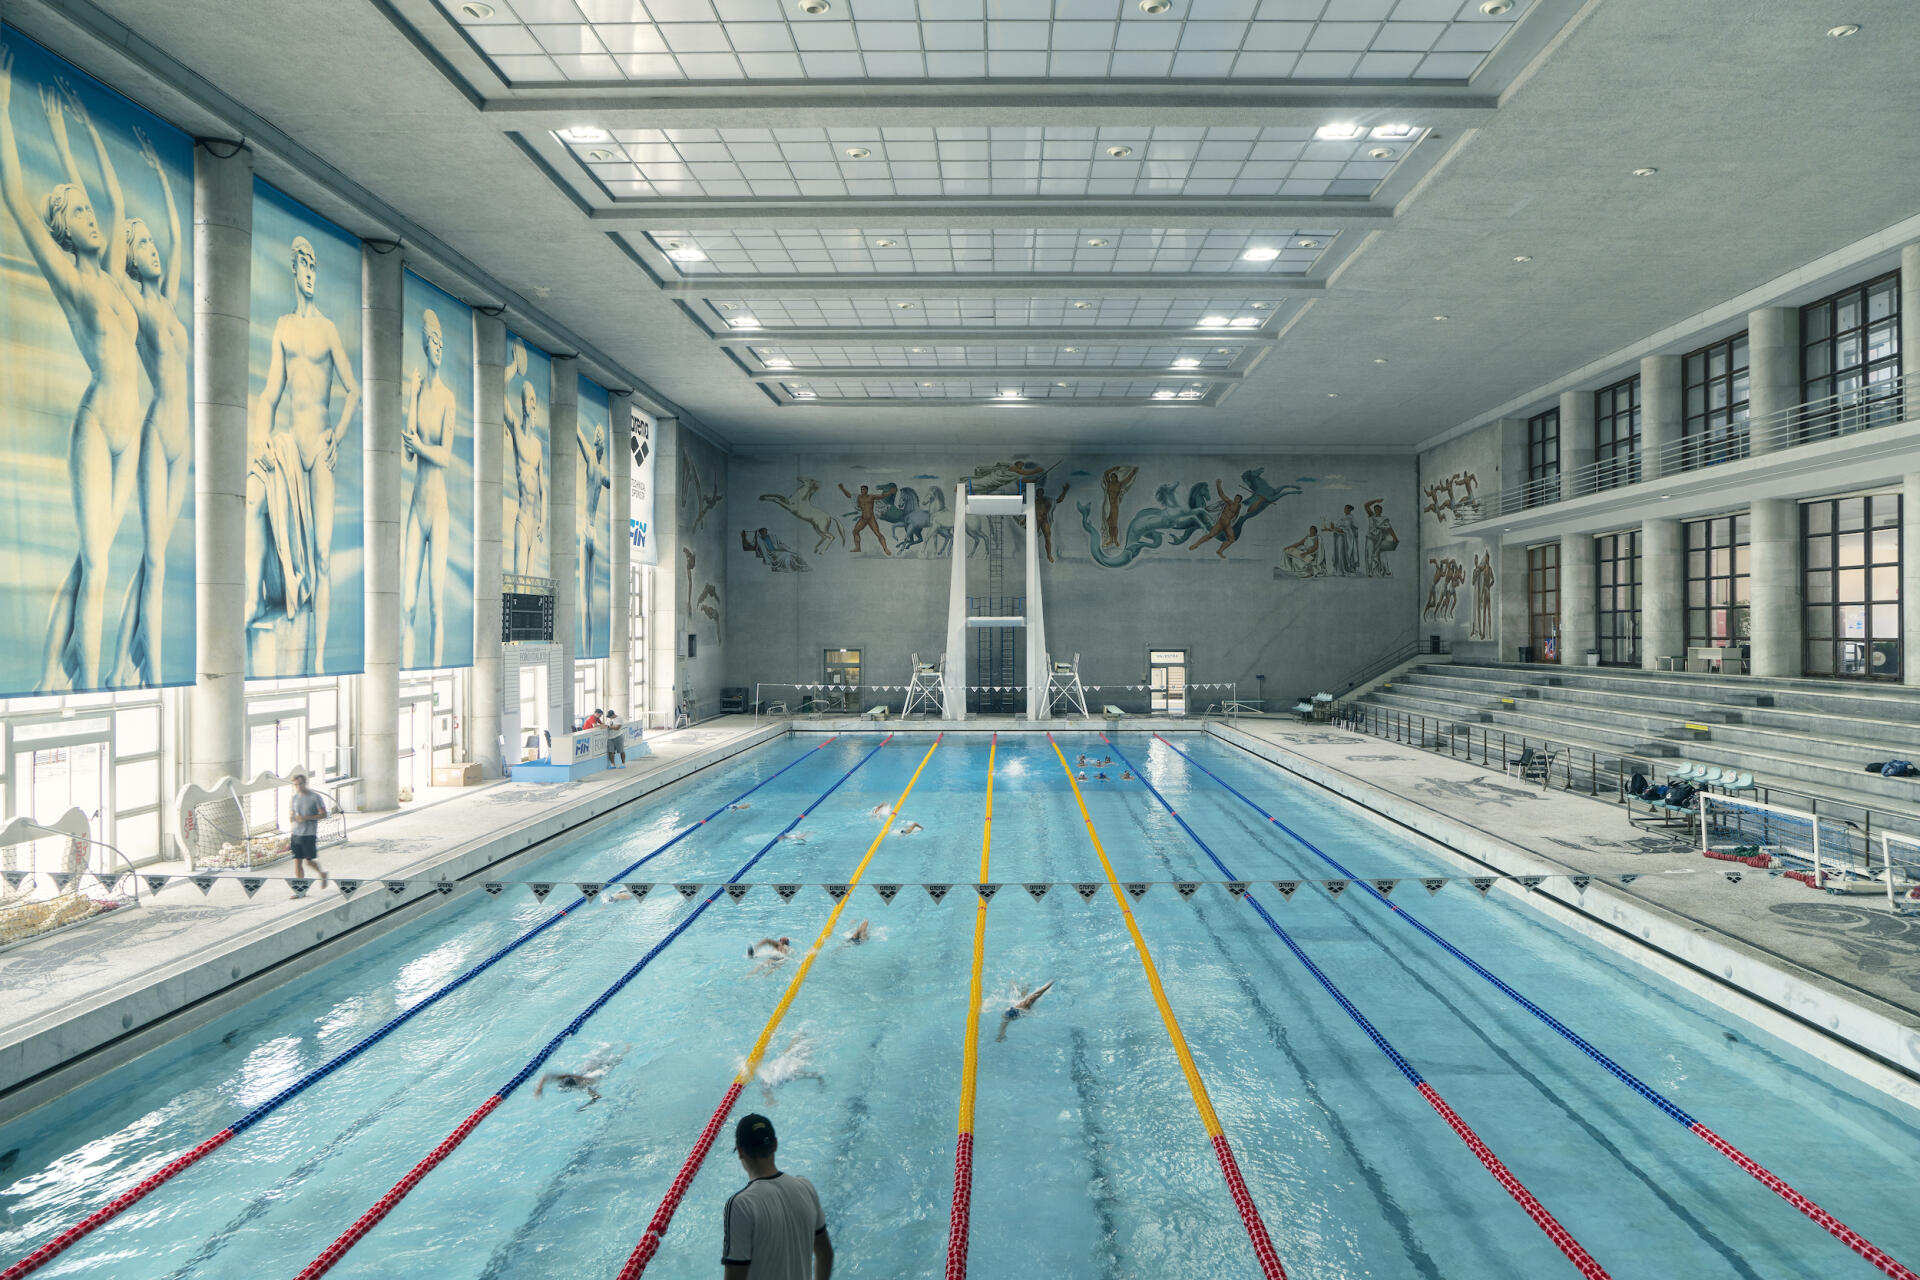 The Foro Italico swimming complex, built in the 1930s inside what was then the Foro Mussolini 